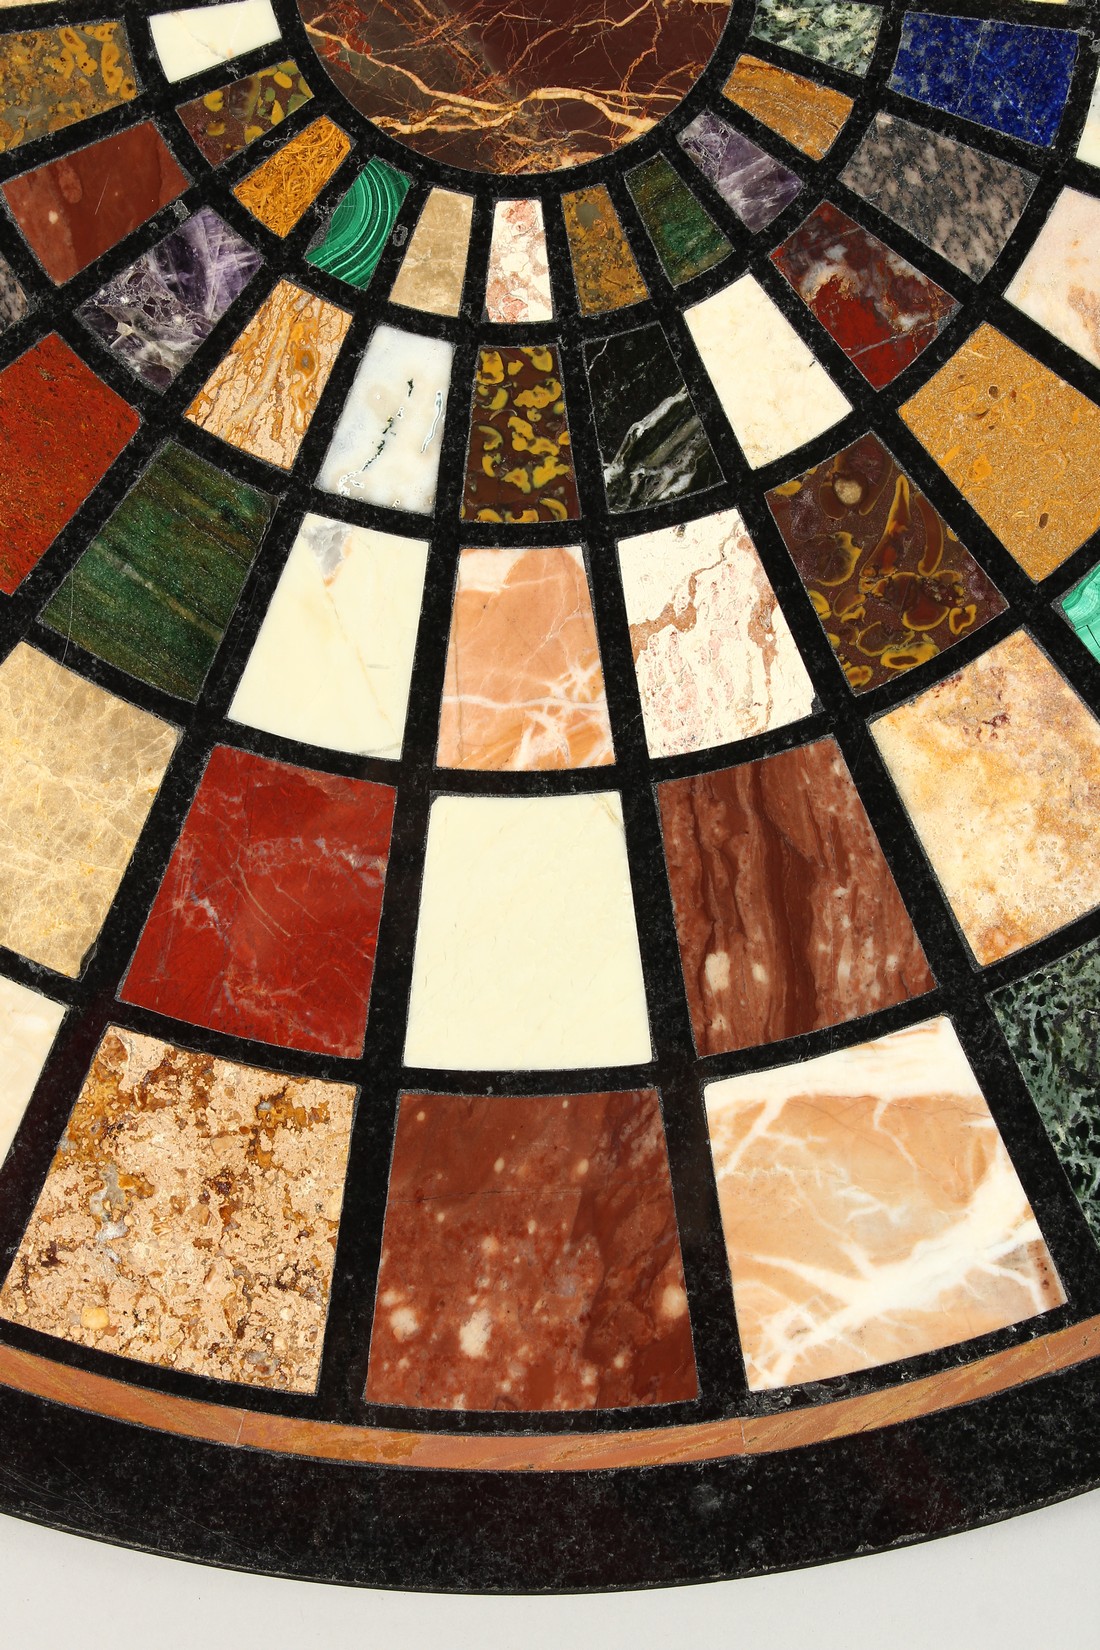 A VERY GOOD SPECIMEN MARBLE CIRCULAR TABLE TOP, with radiating bands and sections of various marbles - Image 8 of 11